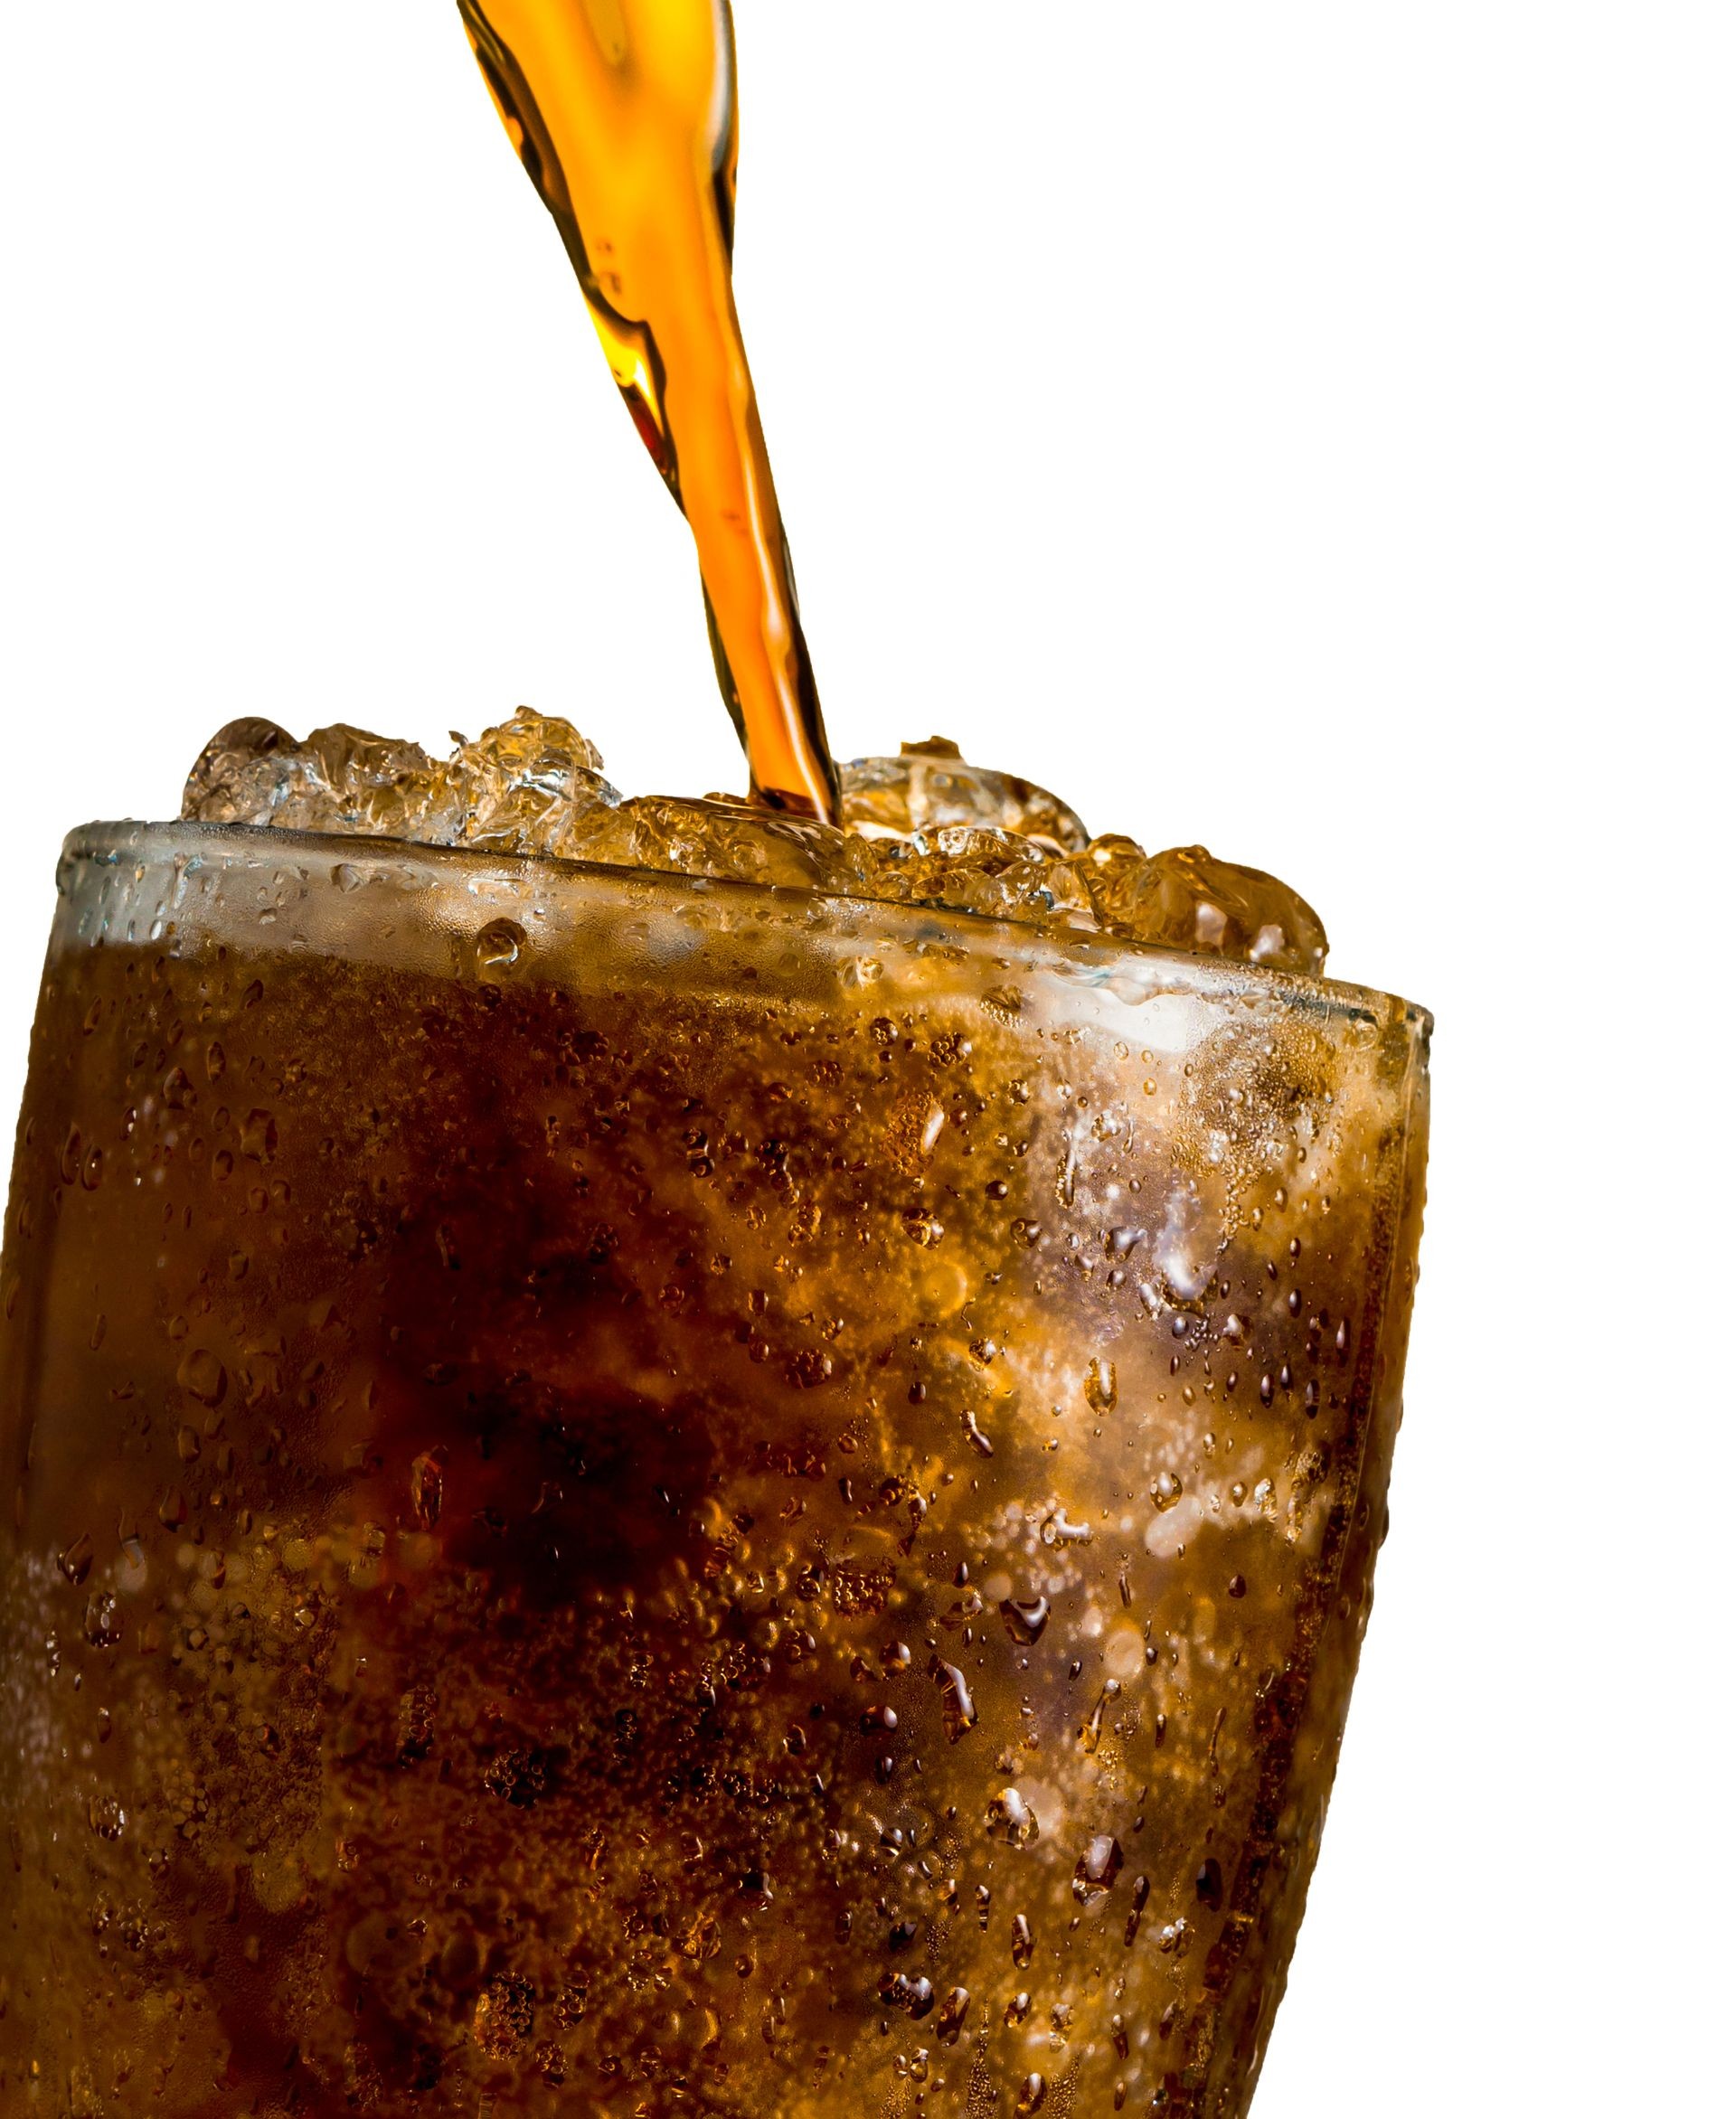 Closeup of soft drink pouring to glass with crushed ice cubes on white background. There is a drop of water on the transparent glass surface. Beverage mixed caffeine for freshness. Cool soft drink.